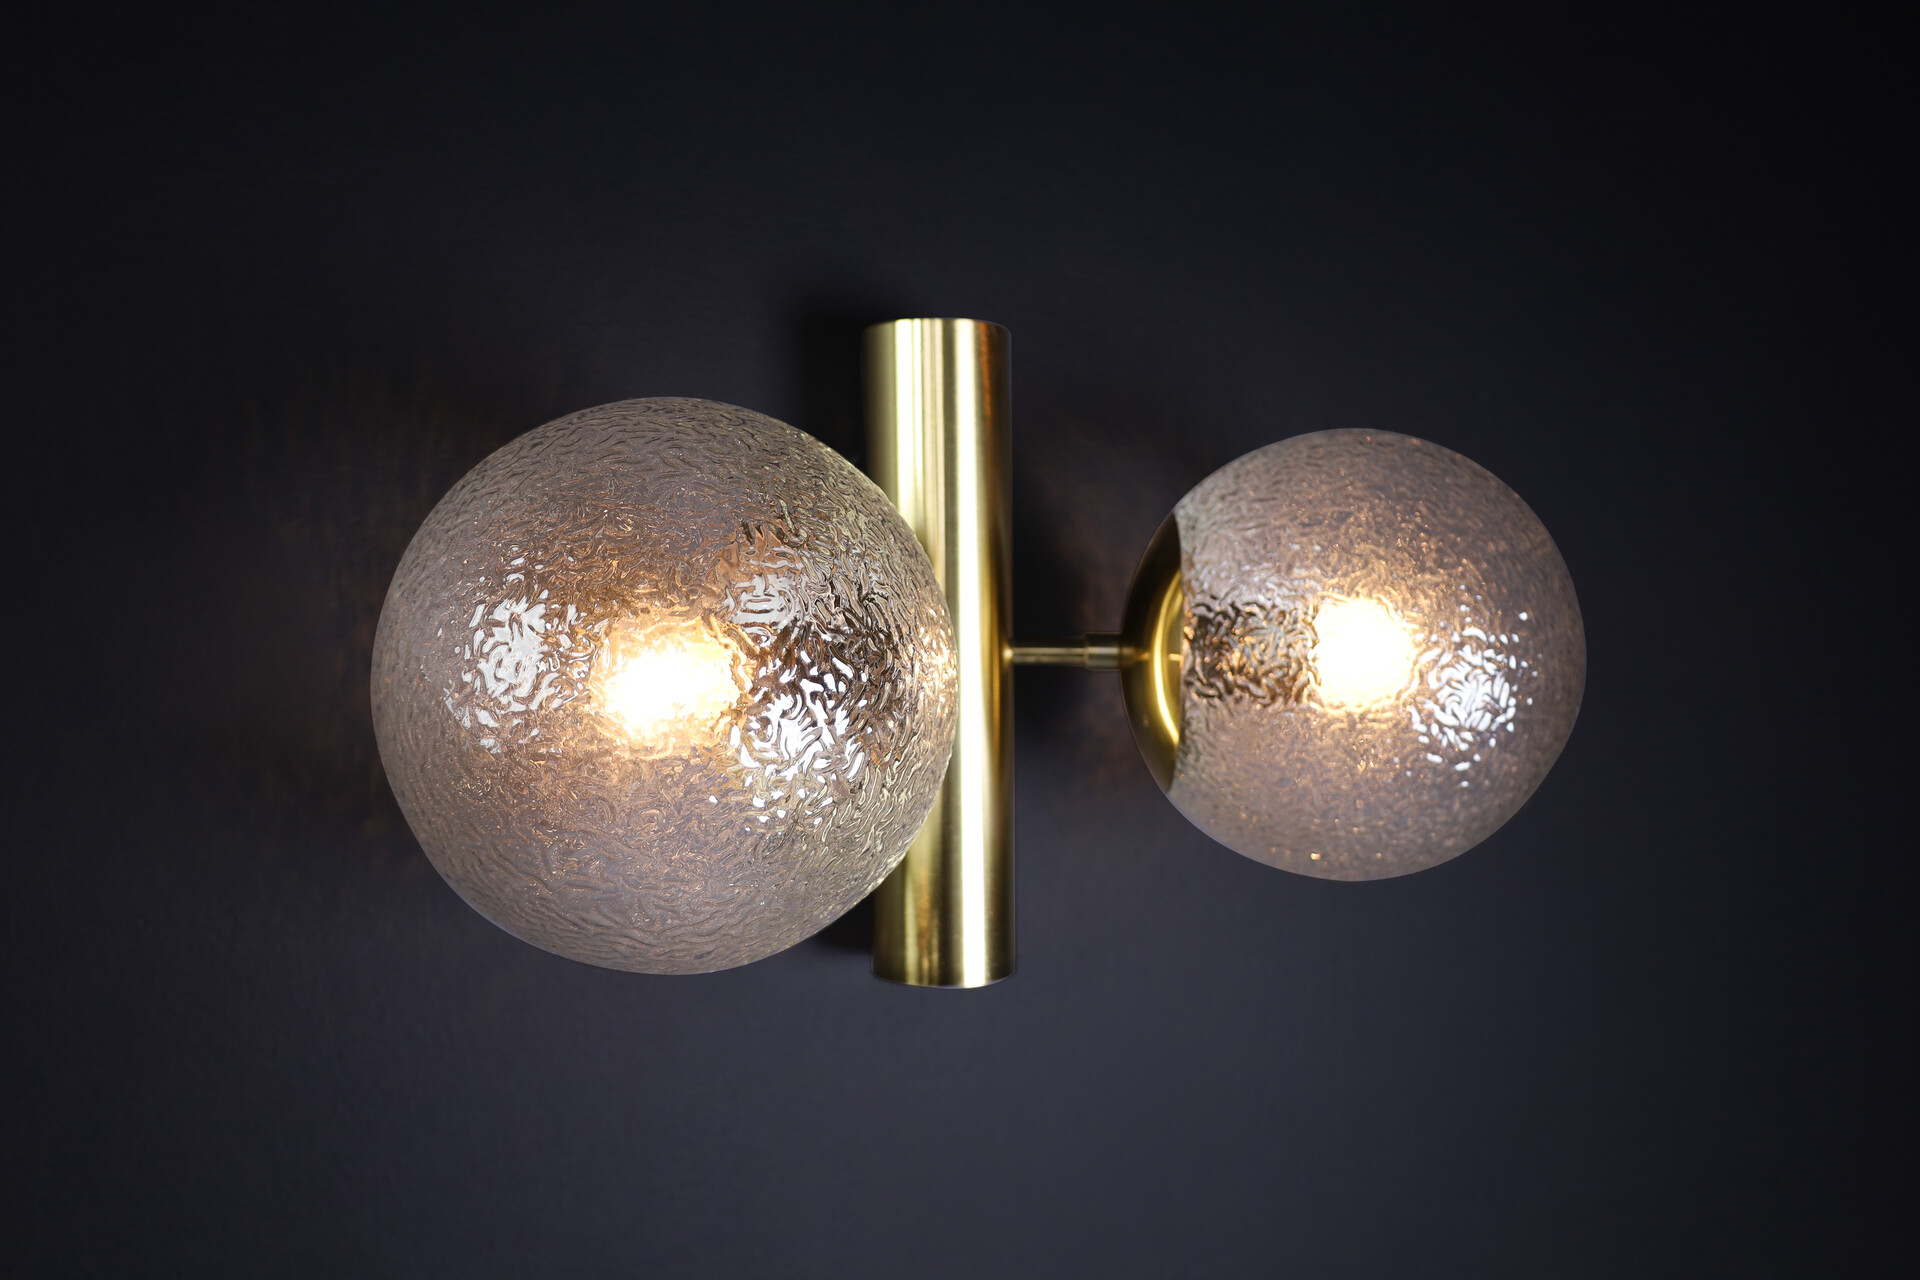 Mid century modern Bras and glass sconces, Germany 1960s Mid-20th century